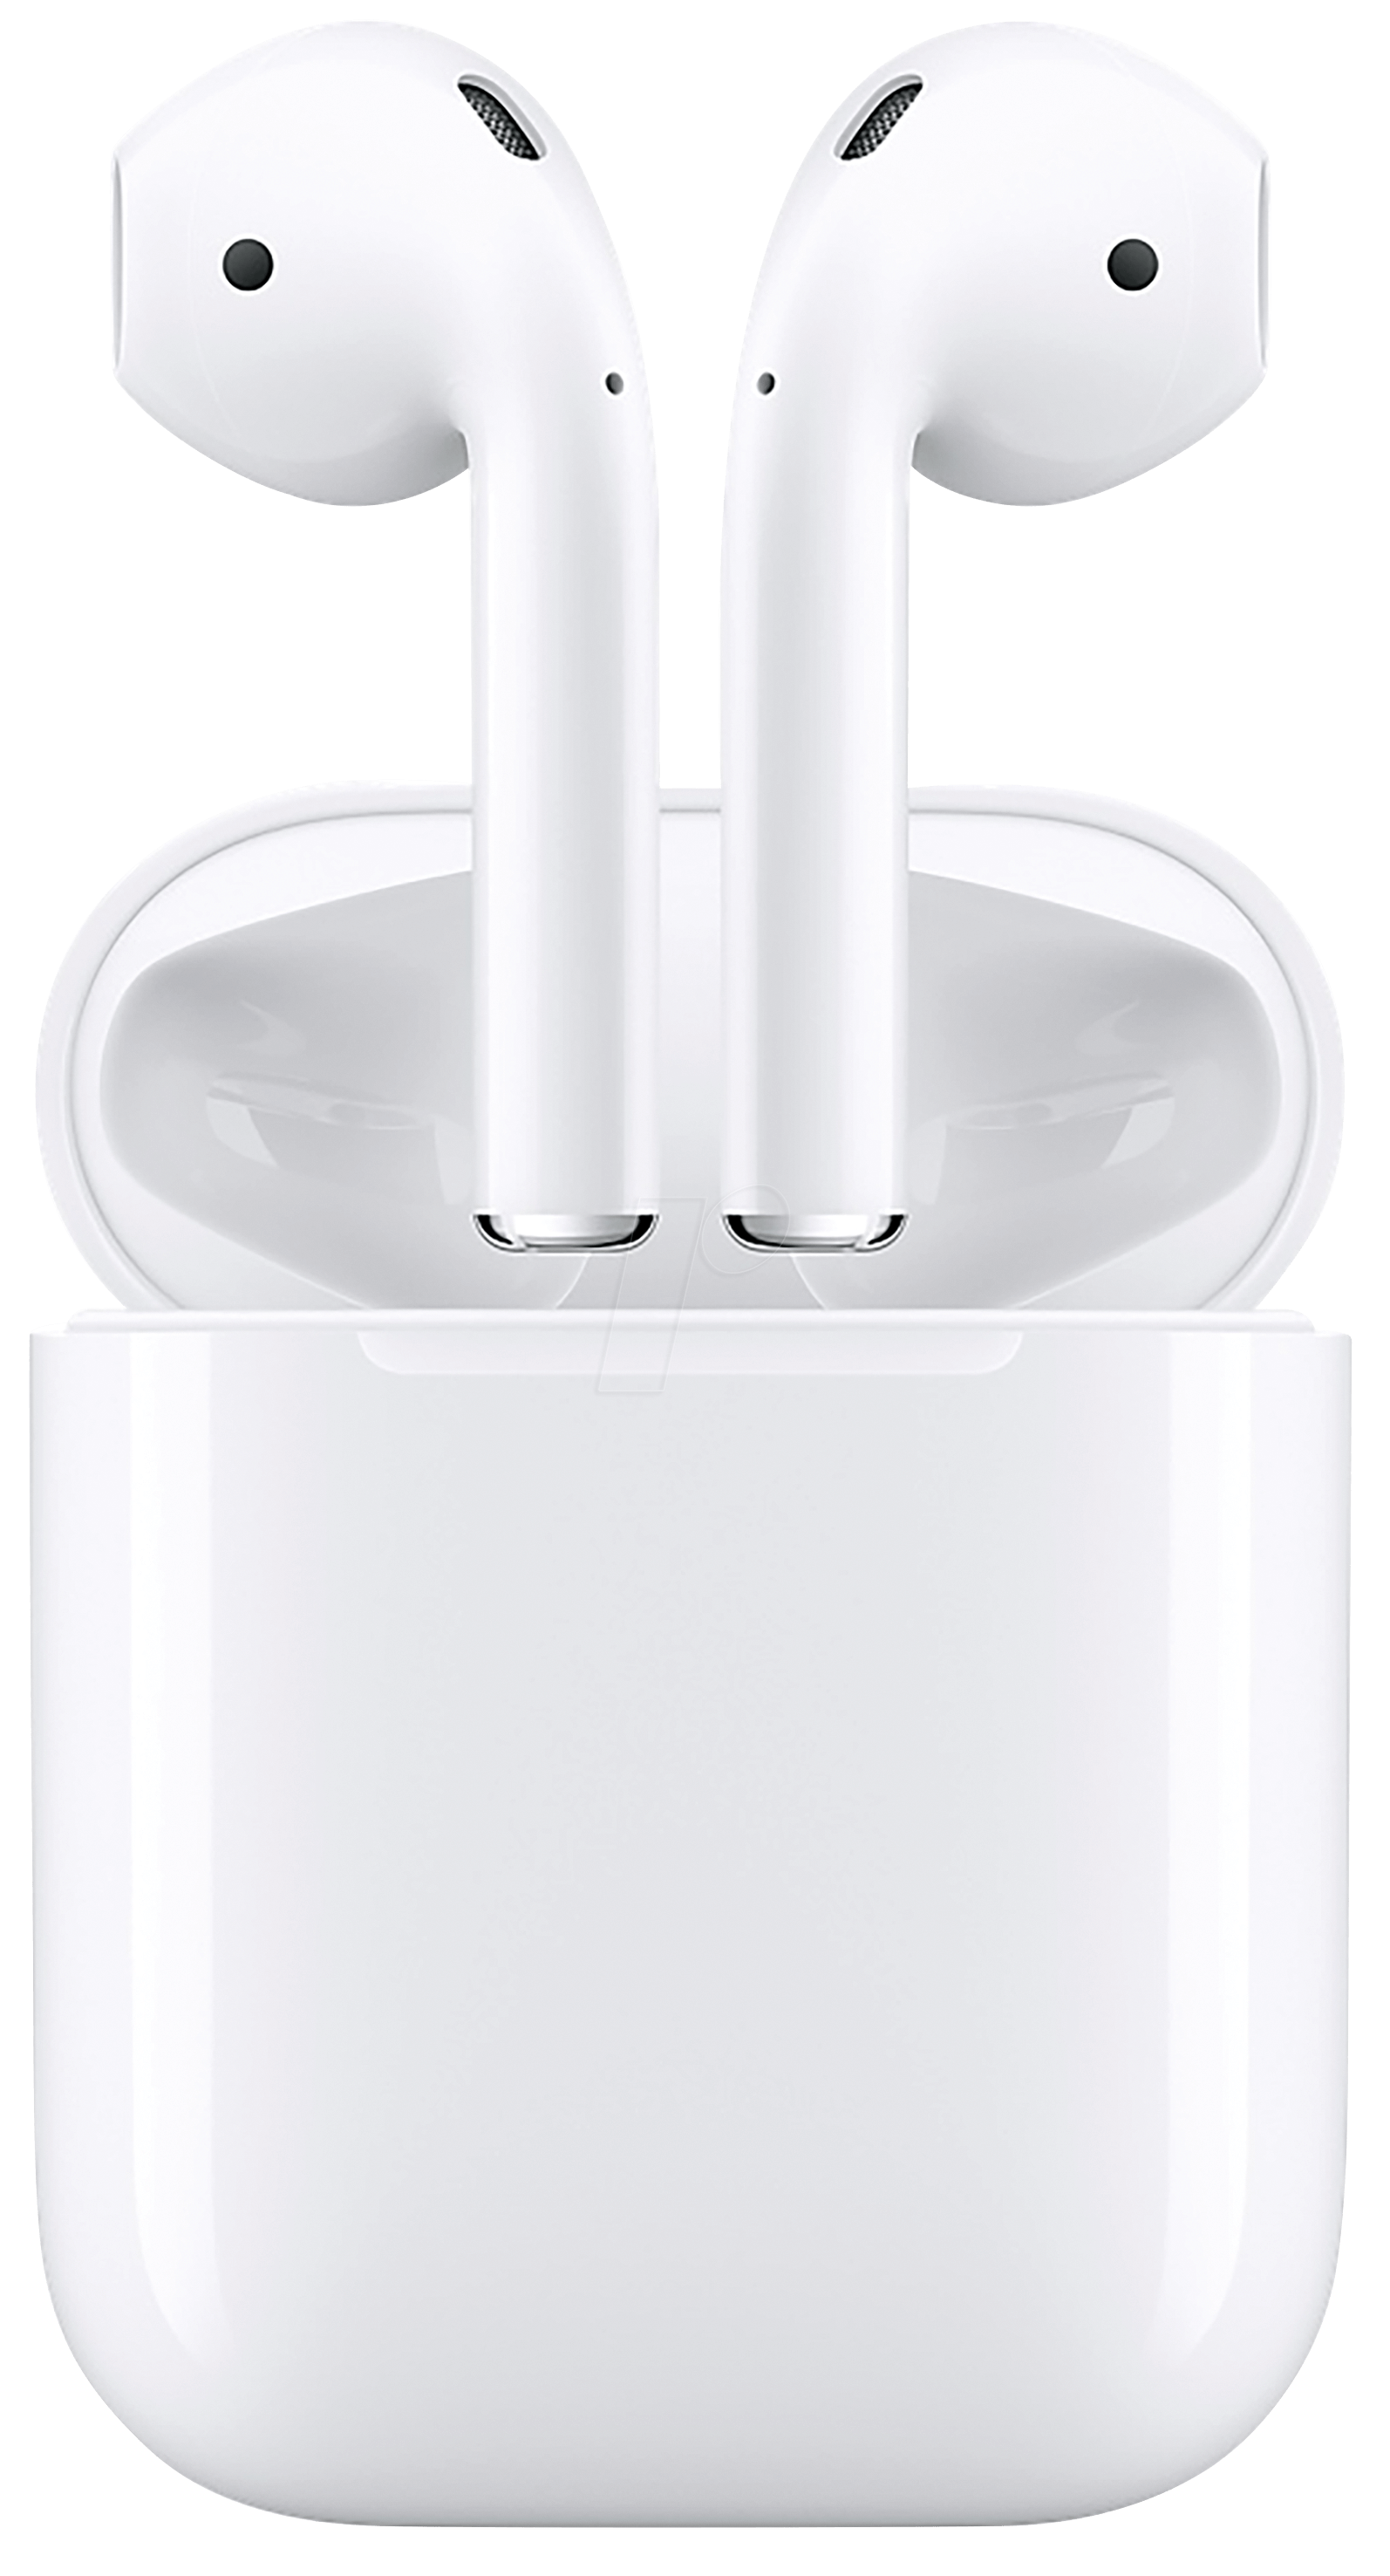 Body Airpods Angle Jewelry Headphones Iphone PNG Image